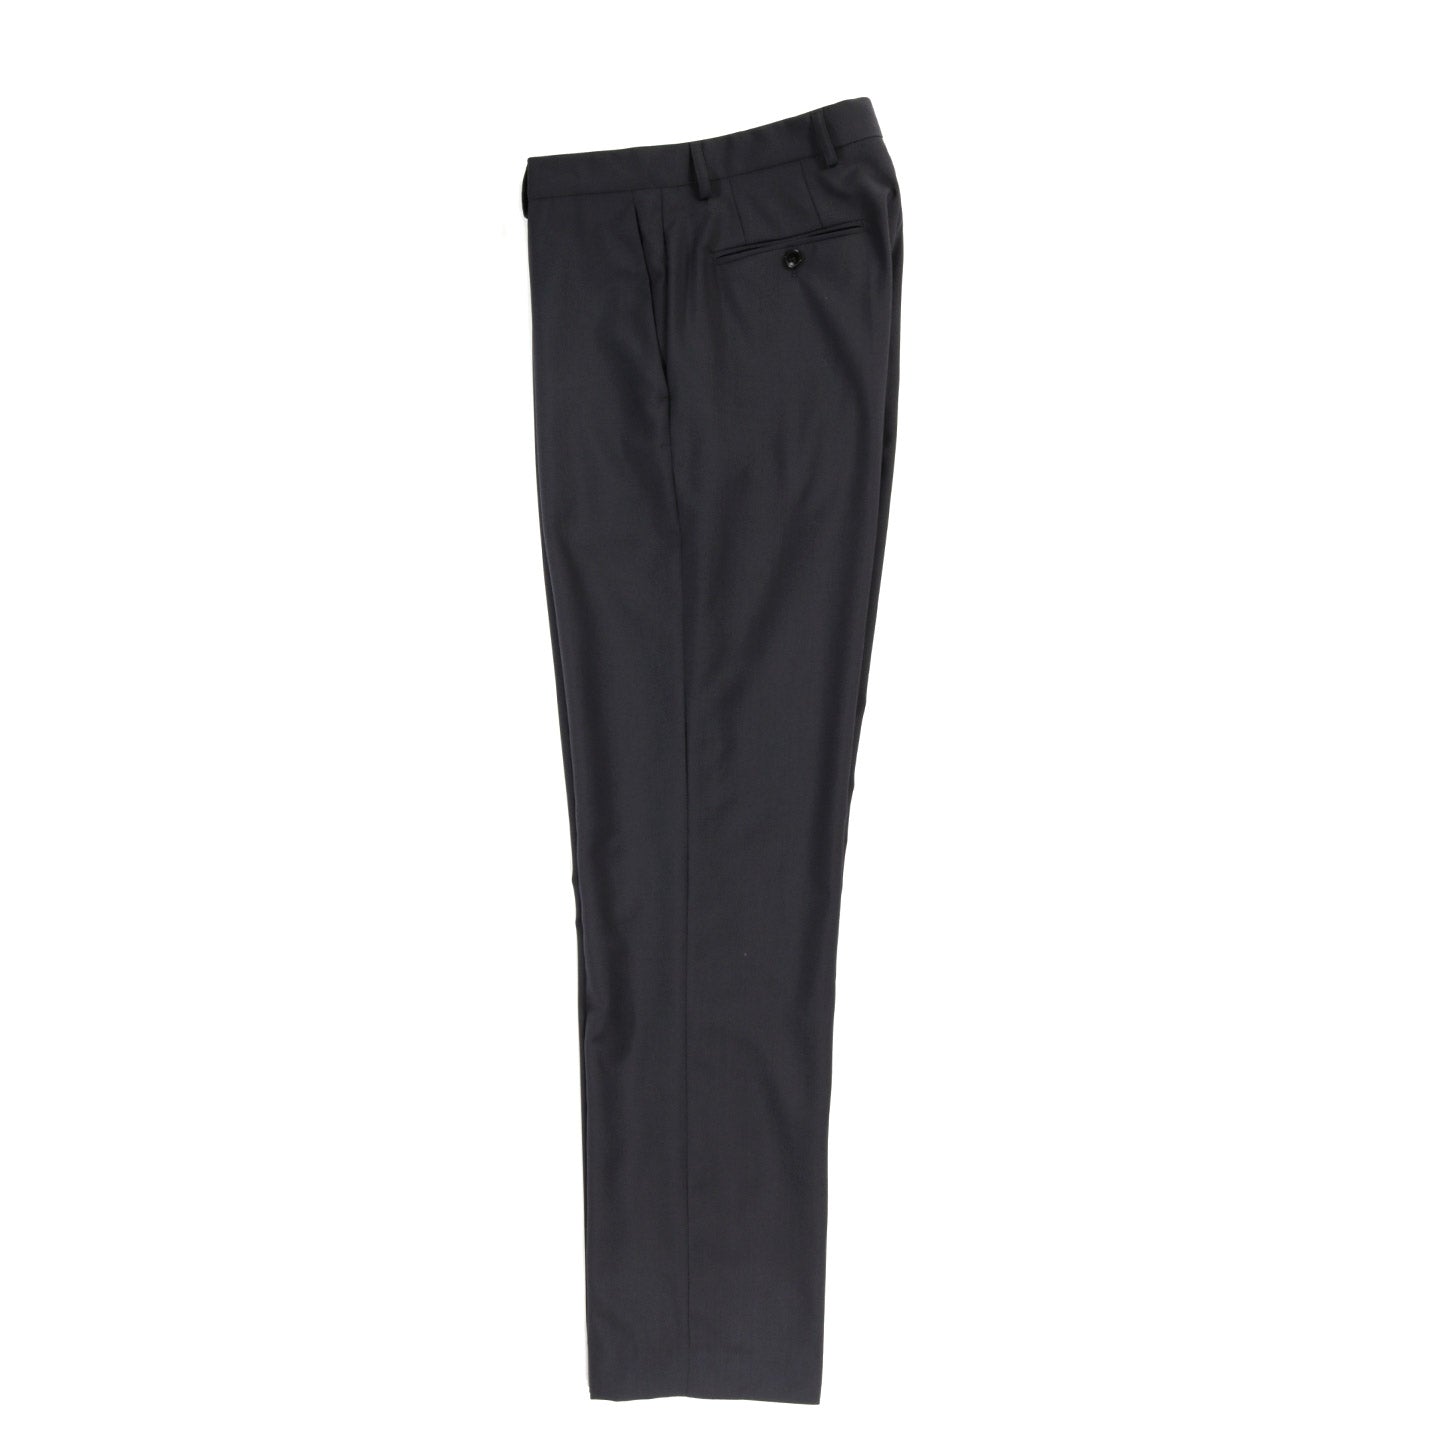 A KIND OF GUISE RELAXED TAILORED TROUSERS BELUGA GREY